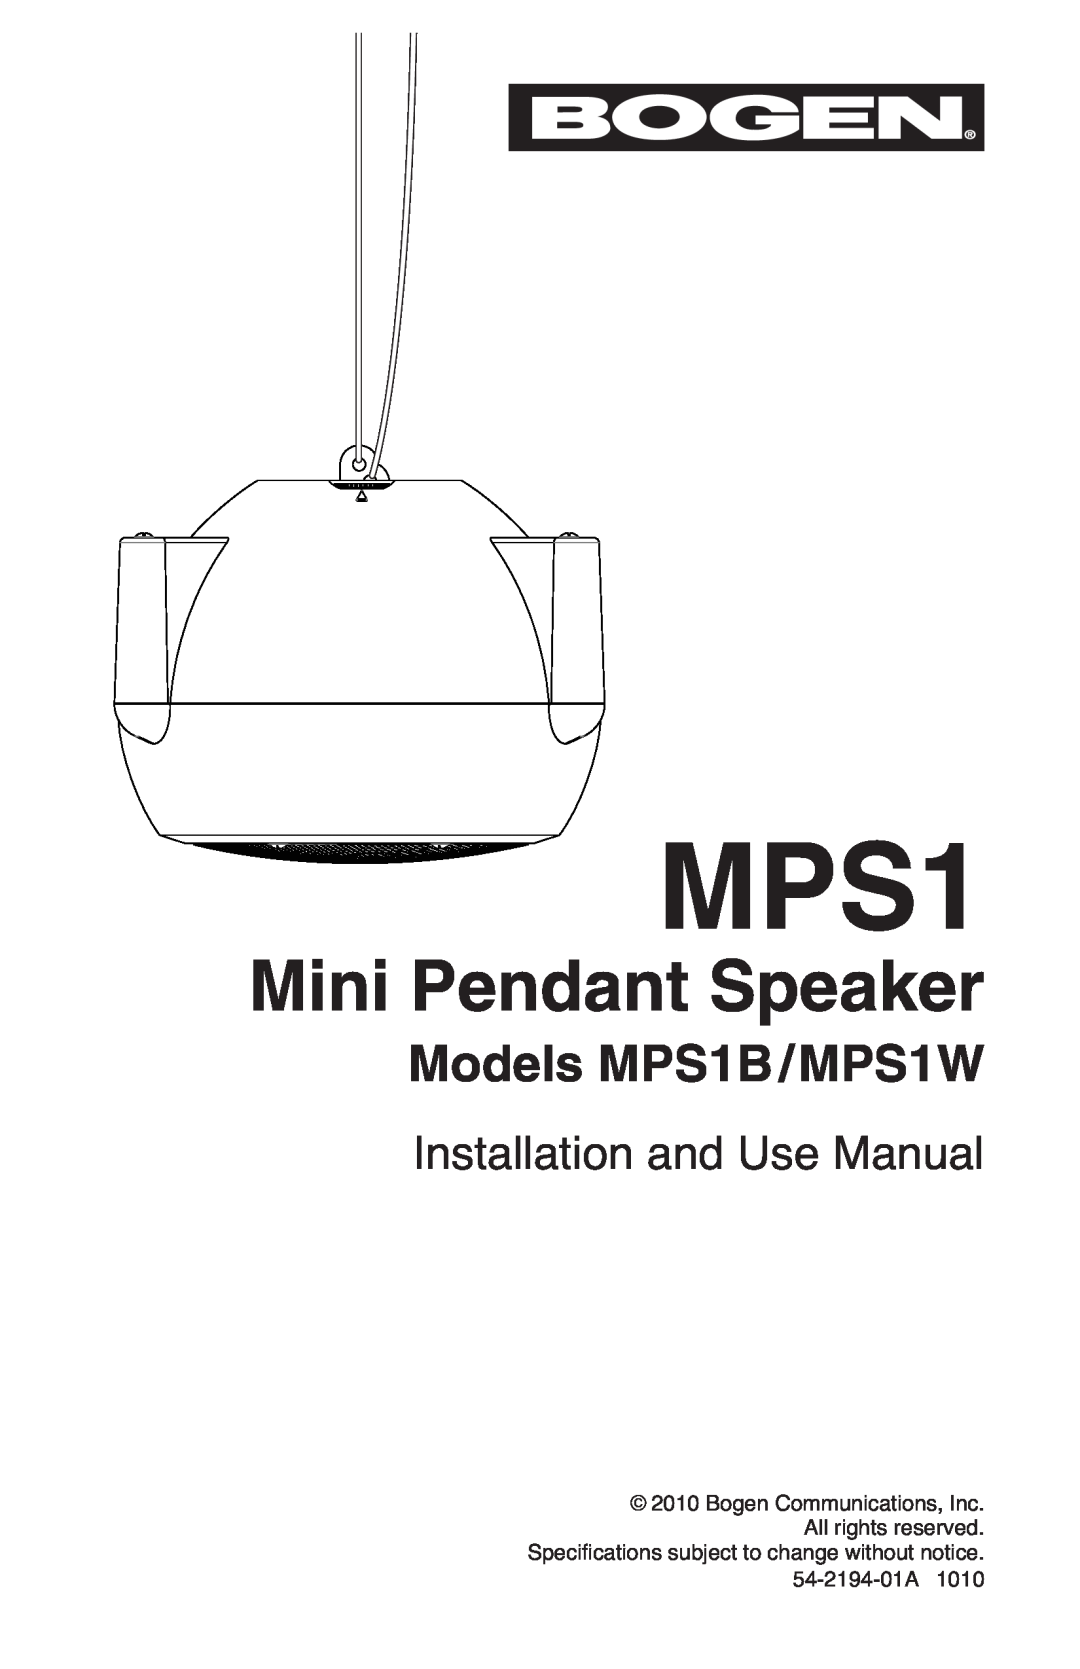 Bogen specifications Mini Pendant Speaker, Models MPS1B/MPS1W, Installation and Use Manual 